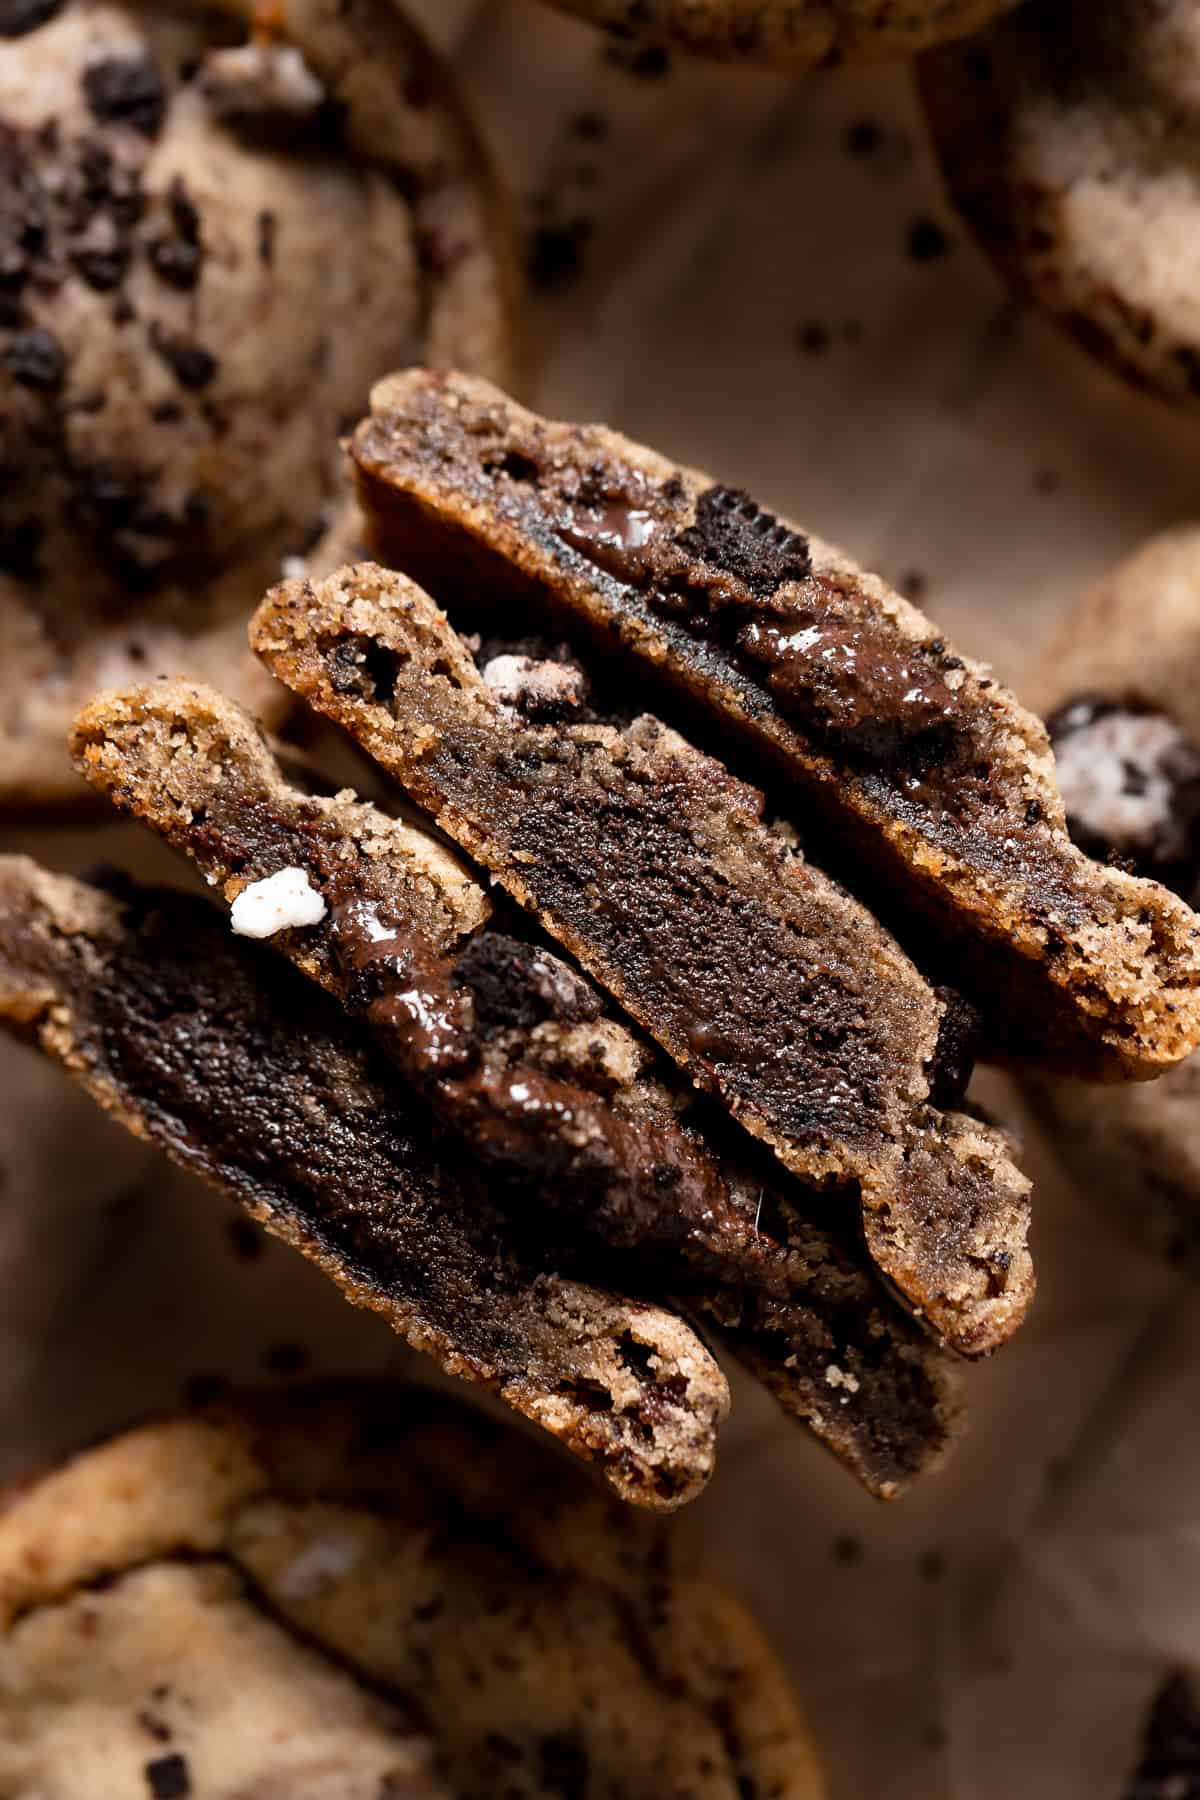 oreo chocolate chip cookies cut in half to show the gooey chocolate center.